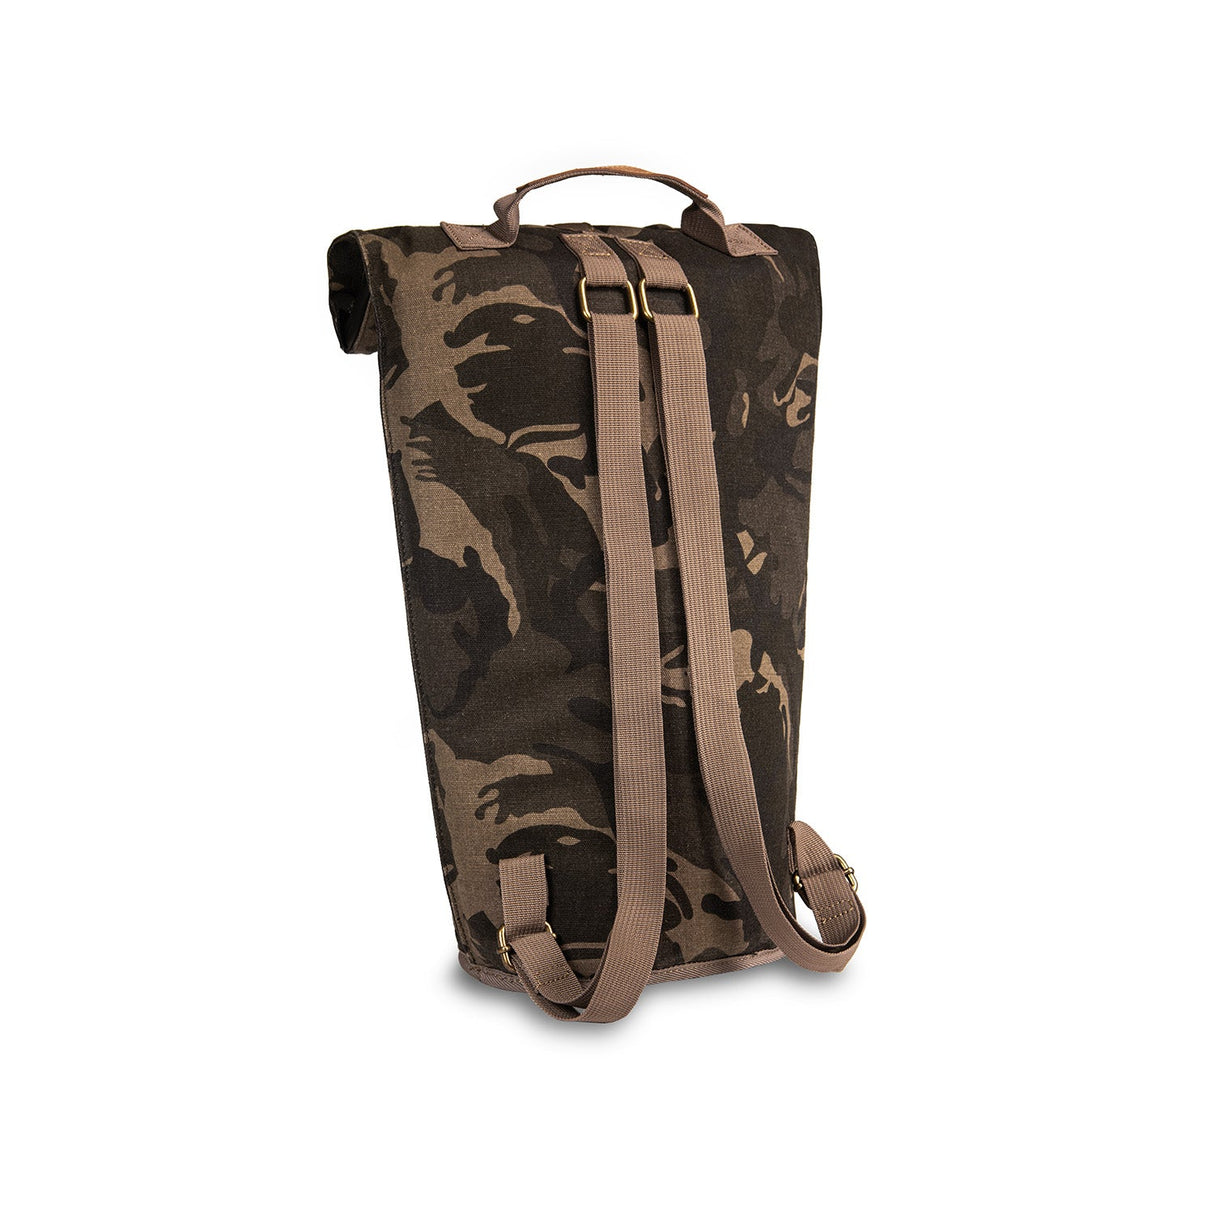 Revelry Supply The Defender - Smell Proof Padded Backpack in Camouflage - Front View